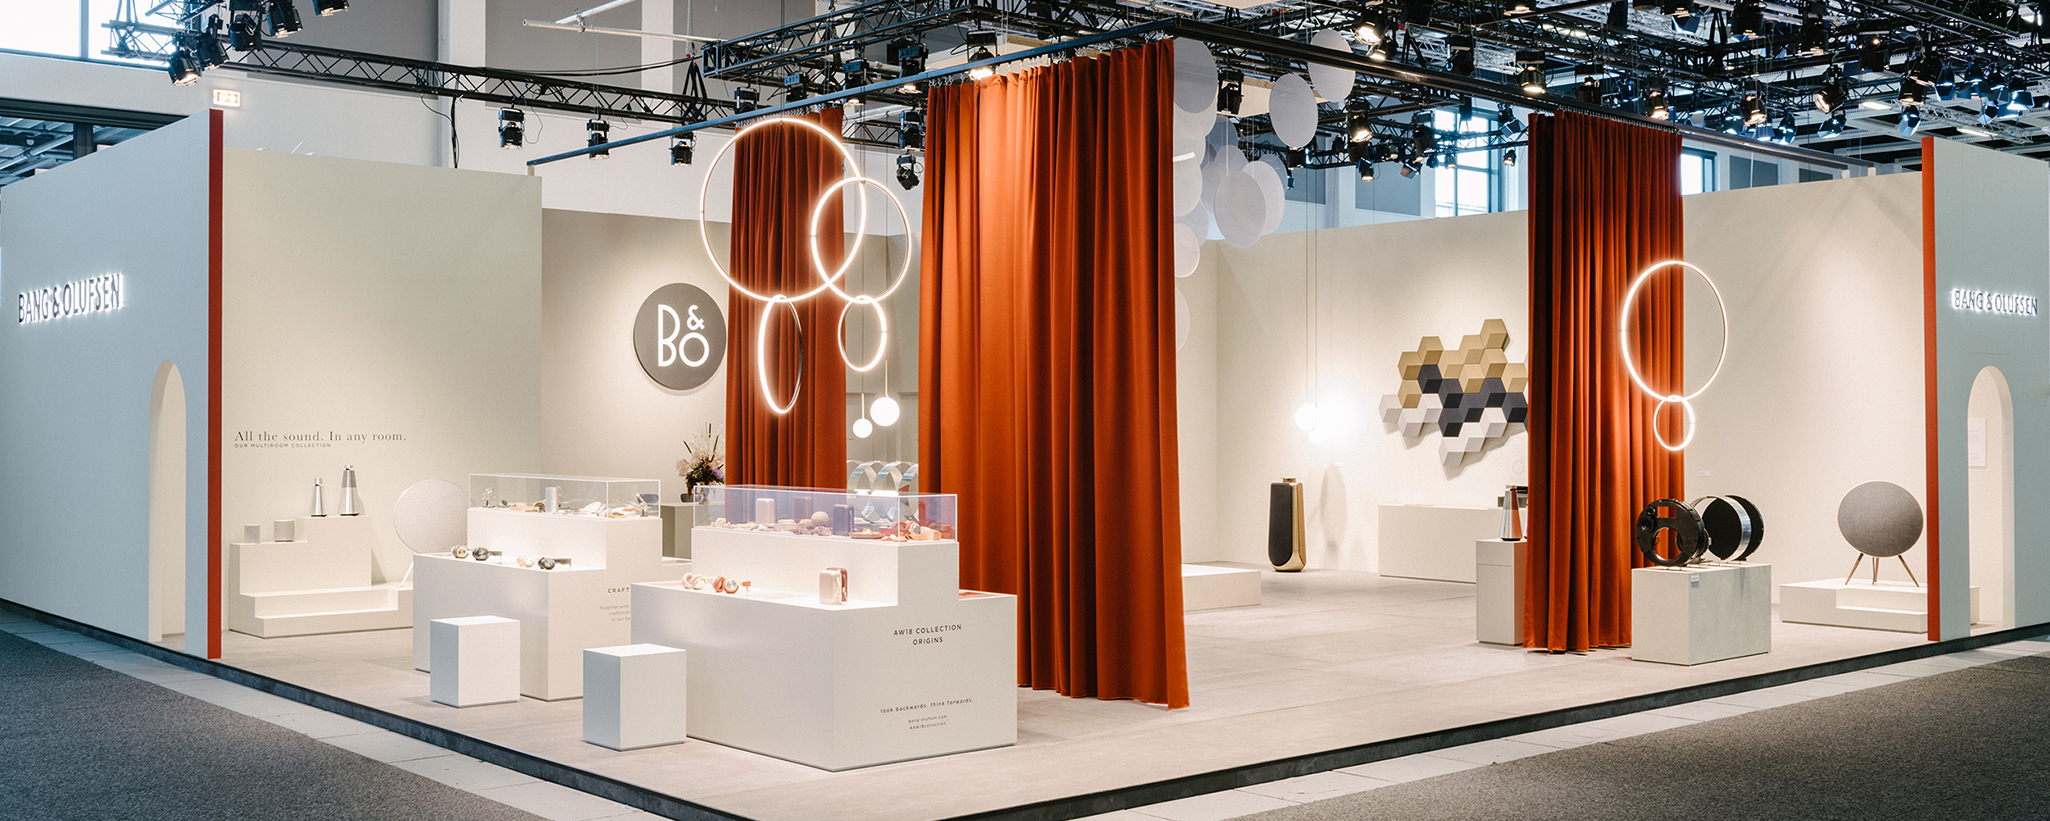 Bang & Olufsen: Design of exhibtion stand for product launch